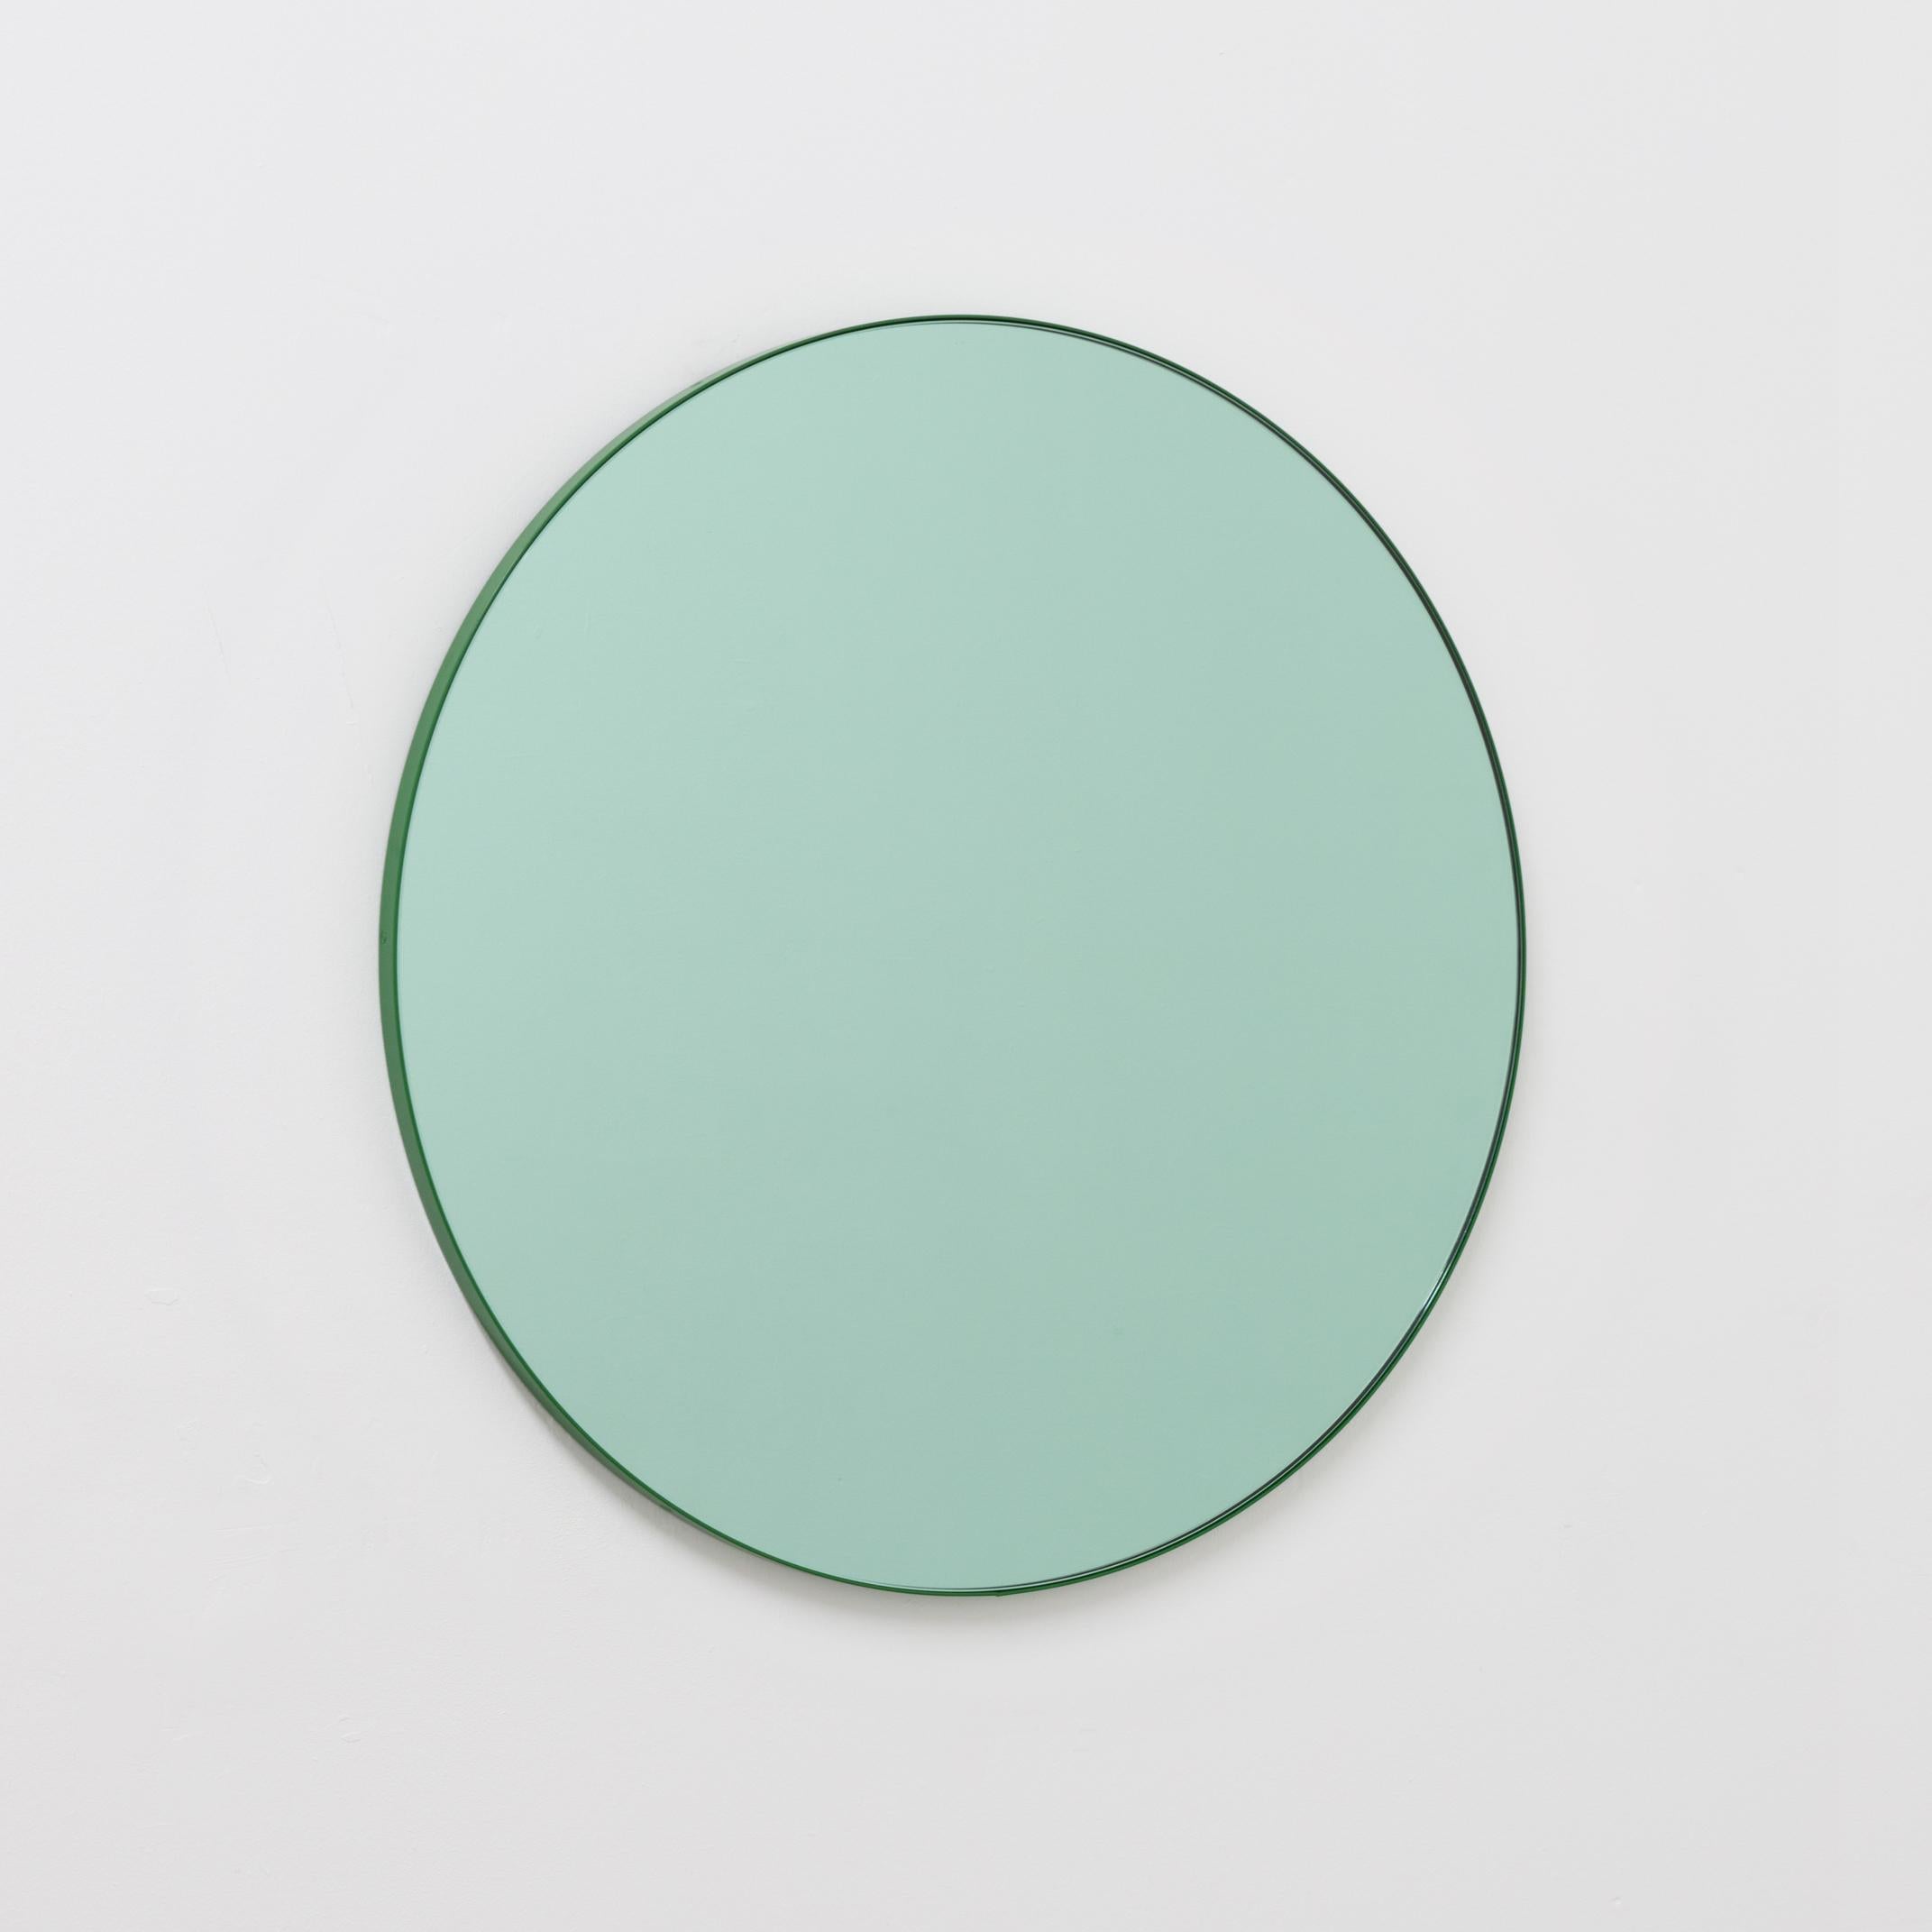 Contemporary green tinted round mirror with a lively green frame. Designed and handcrafted in London, UK.

Fitted with a brass hook or an aluminium z-bar depending on the size of the mirror. Also available on demand with a split batten system to